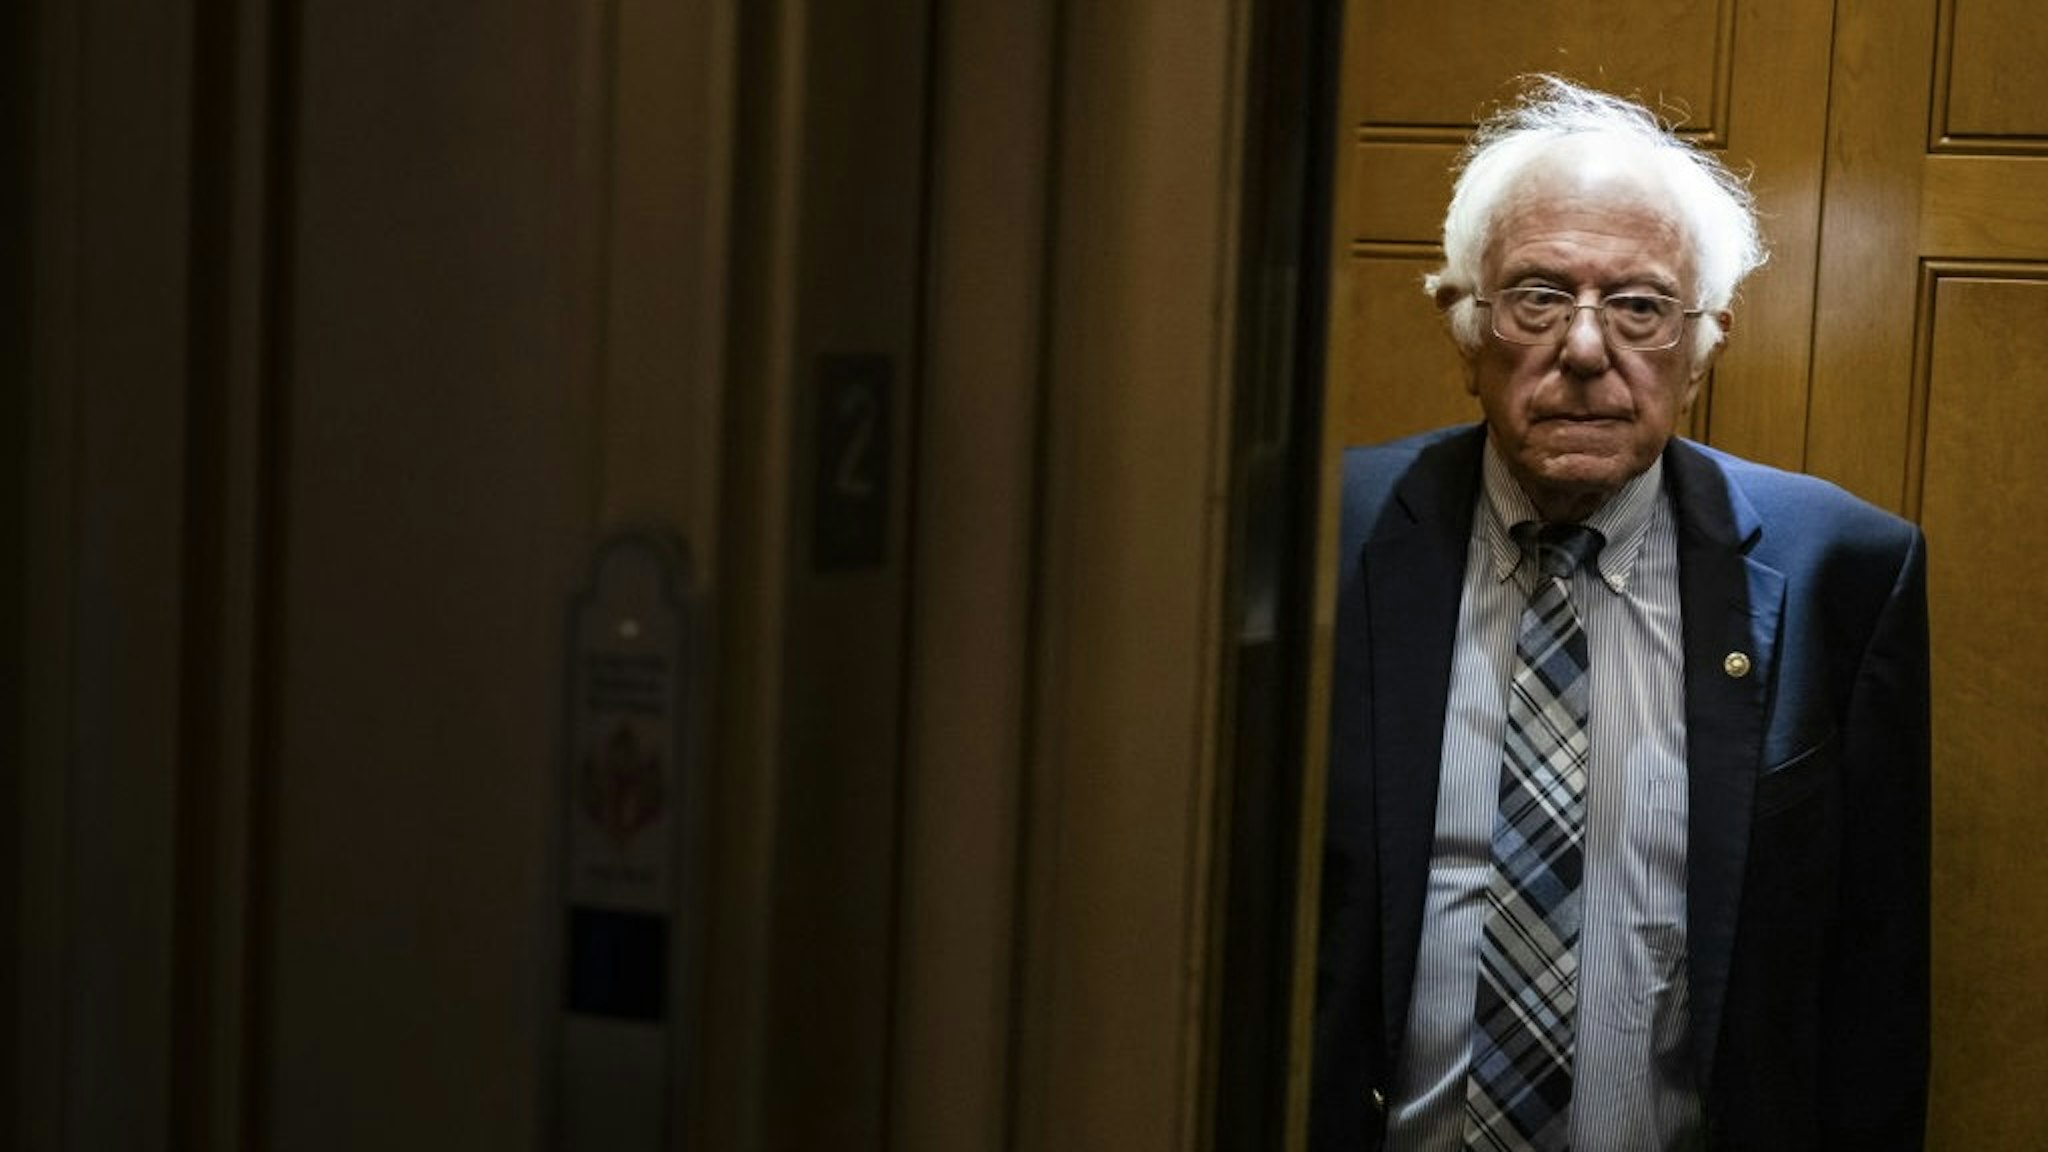 Senate Returns To Work On Infrastructure Negotiations Senator Bernie Sanders, an Independent from Vermont, leaves the Senate floor following a vote in the U.S. Capitol building in Washington, D.C., U.S., on Monday, June 7, 2021. The Senate majority leader is preparing a summer agenda thats set to bring more confrontation than deals with Republicans even as President Biden continues his quest to bring the GOP on board for his infrastructure plans. Photographer: Samuel Corum/Bloomberg via Getty Images Bloomberg / Contributor via Getty Images